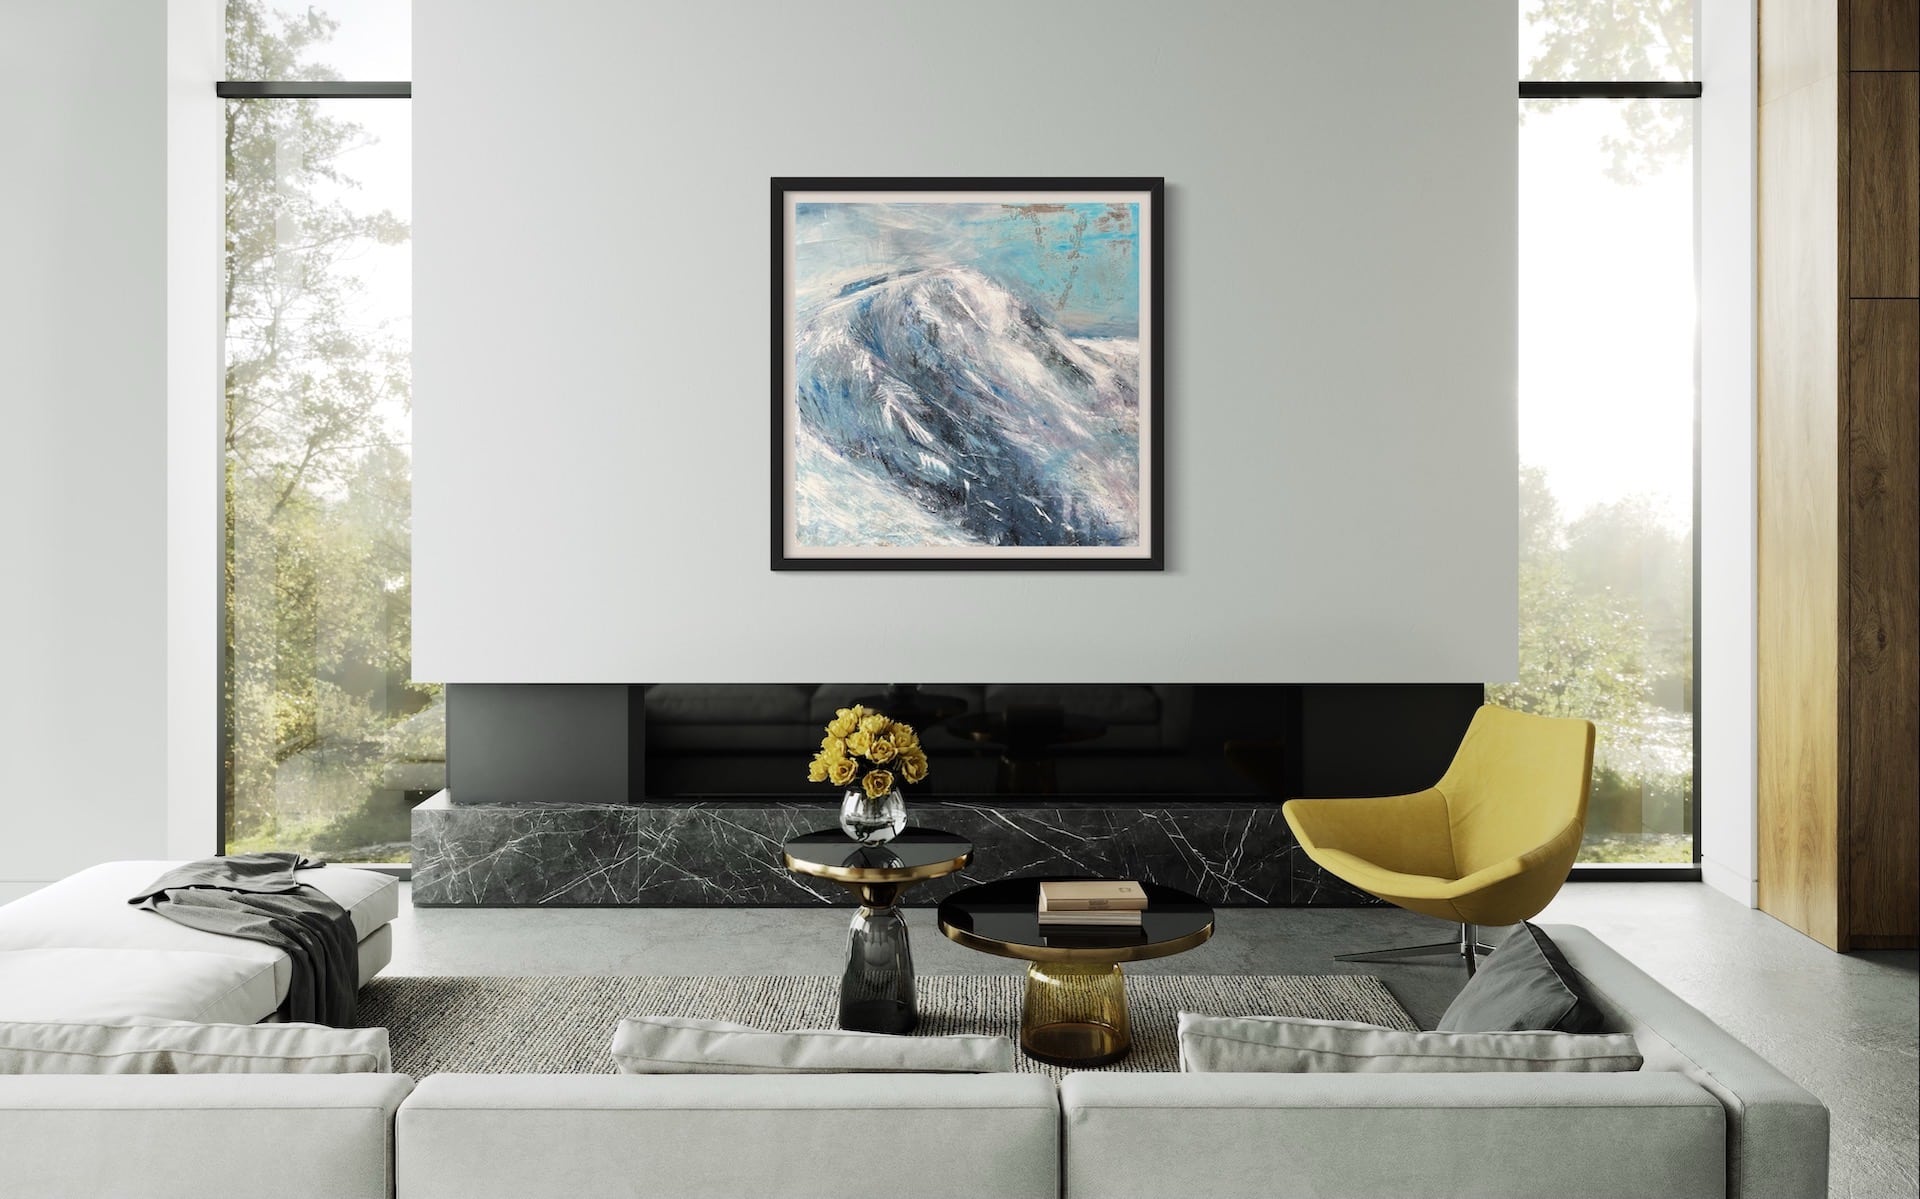 A contemporary mountain oil painting on metal panel by artist Cynthia McLoughlin of Jupiter Bowl at the Park City Mountain Resort in Park City, Utah.